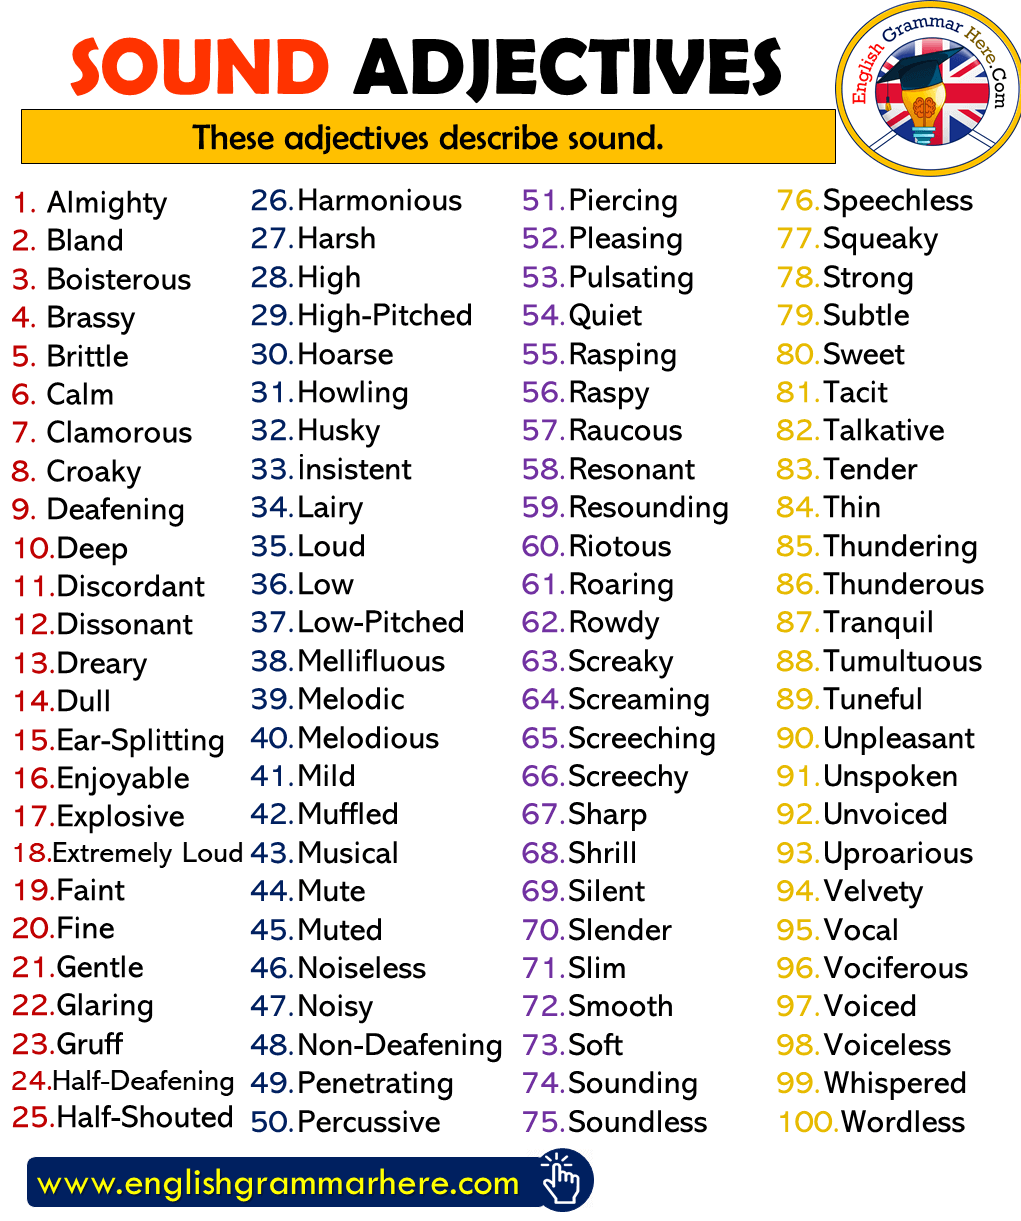 Sound Adjectives List in English